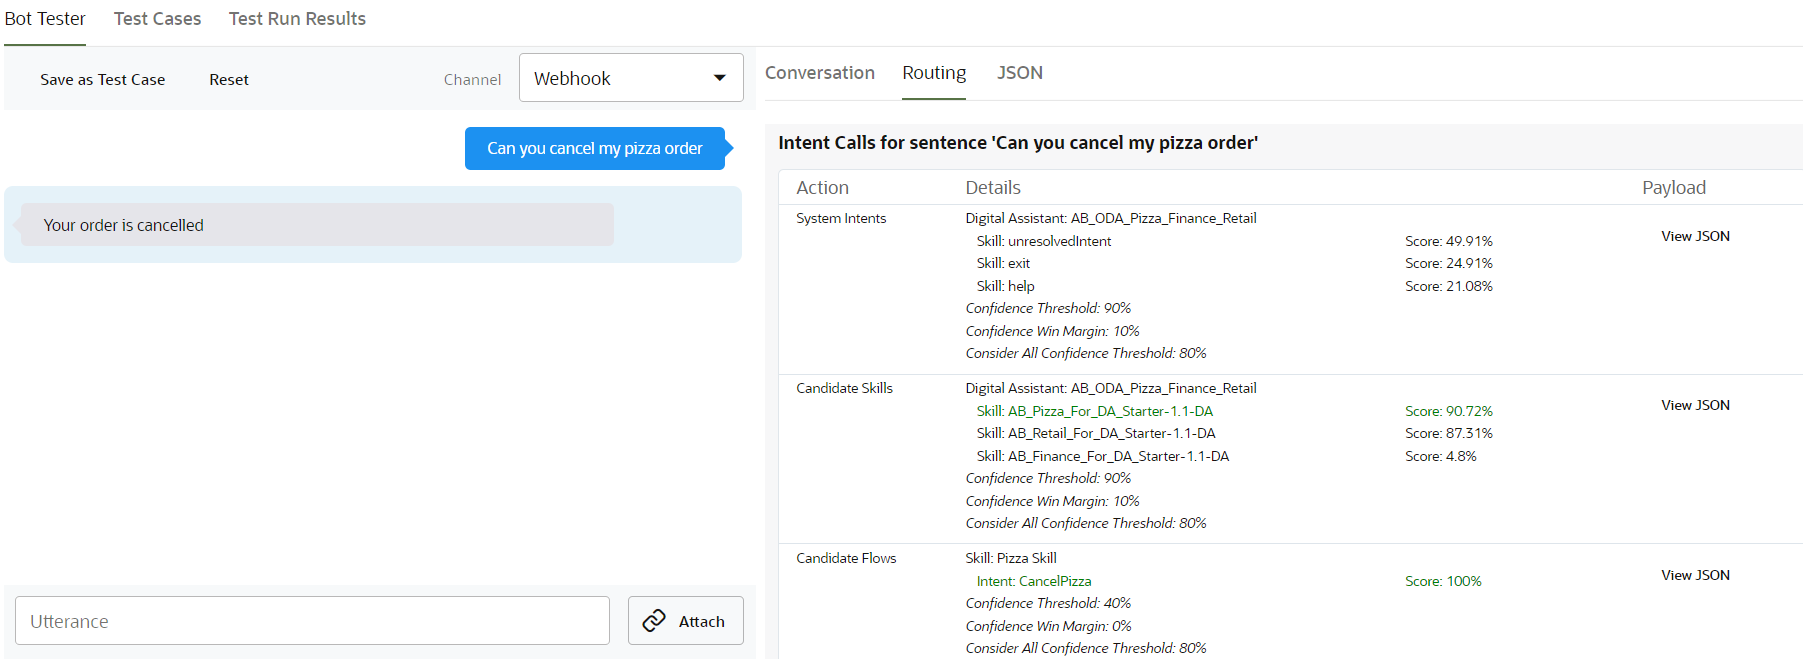 Screenshot of the tester showing input of 'can you cancel my pizza order', followed by a response of 'Your order is canceled'. In the Routing Tab, Pizza Skill is the only Candidate Skill that matches with a score over 90%.